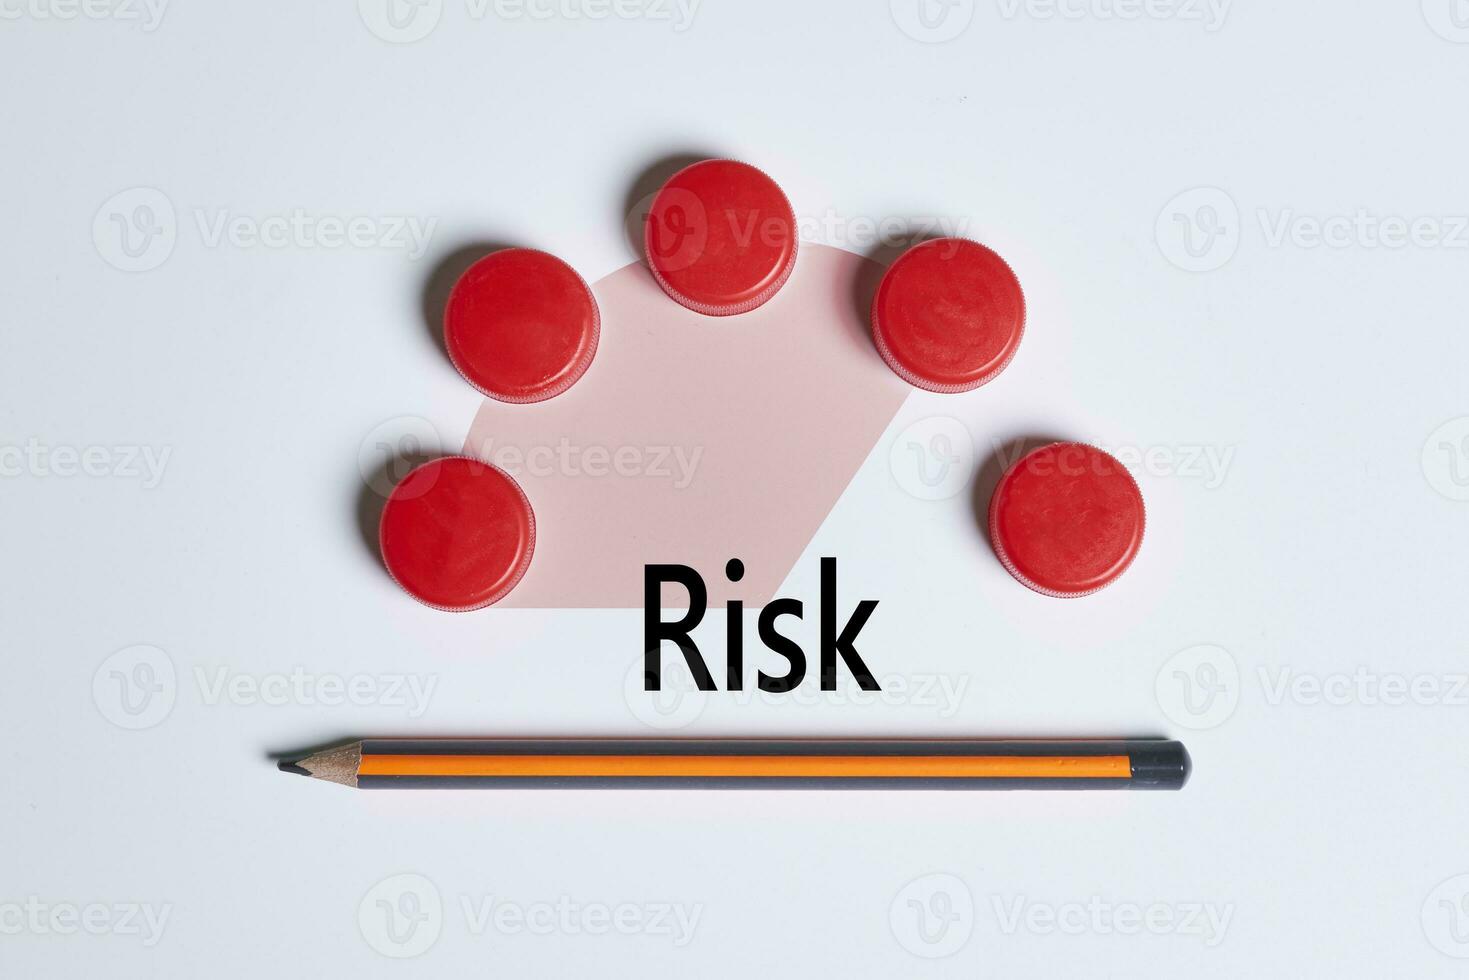 Risk level. Risk concept with red buttons photo